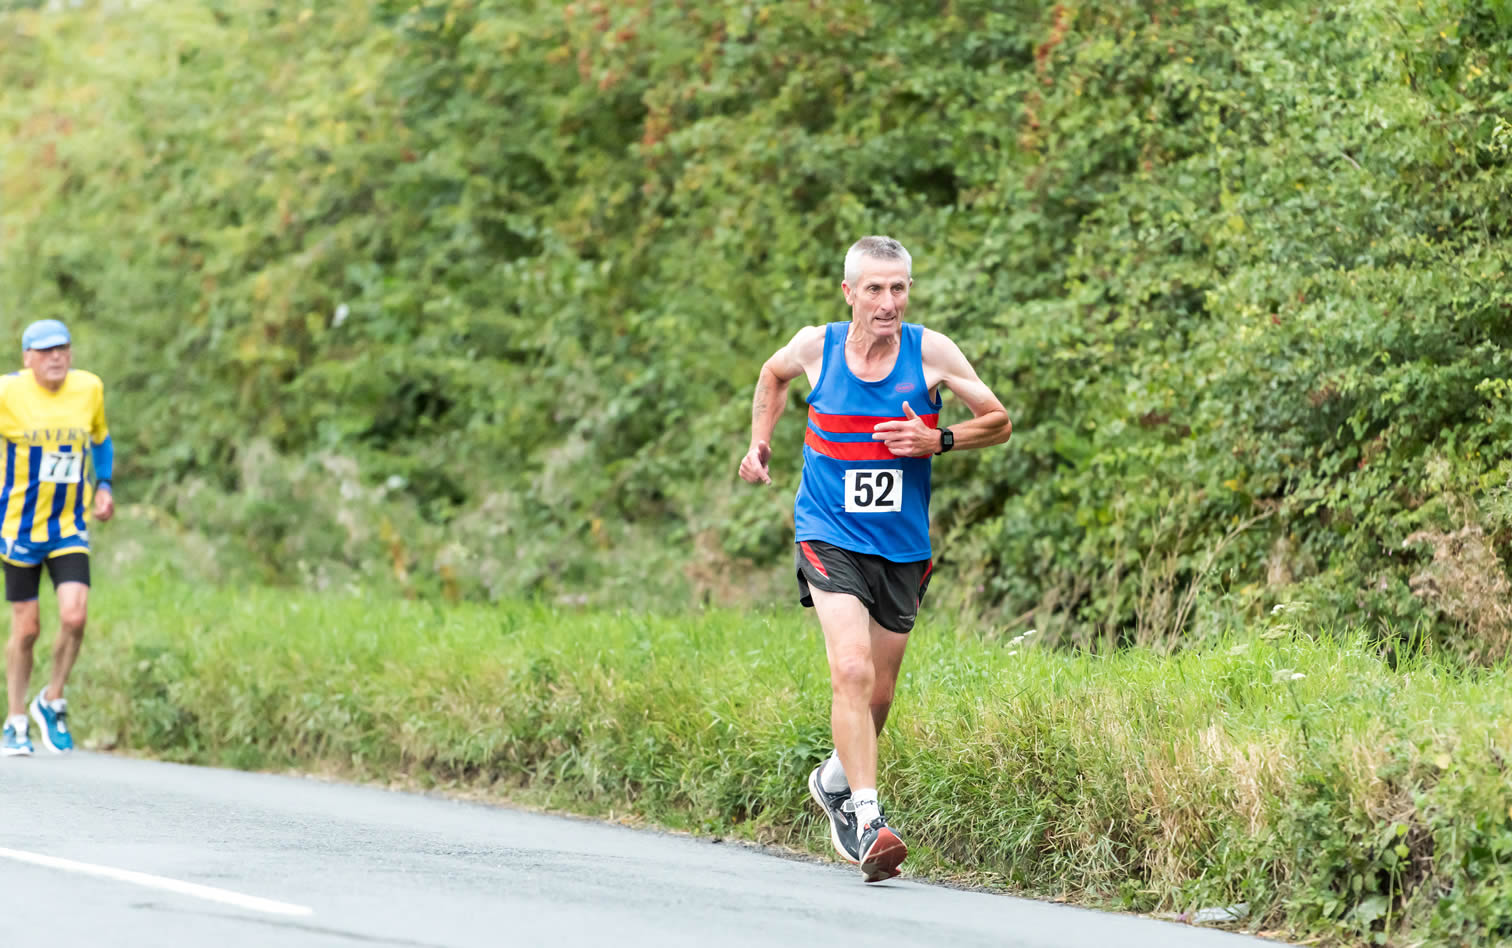 Bourton's Tony Goodwill at Haresfield 5k, 300m to go - 17th August 2022